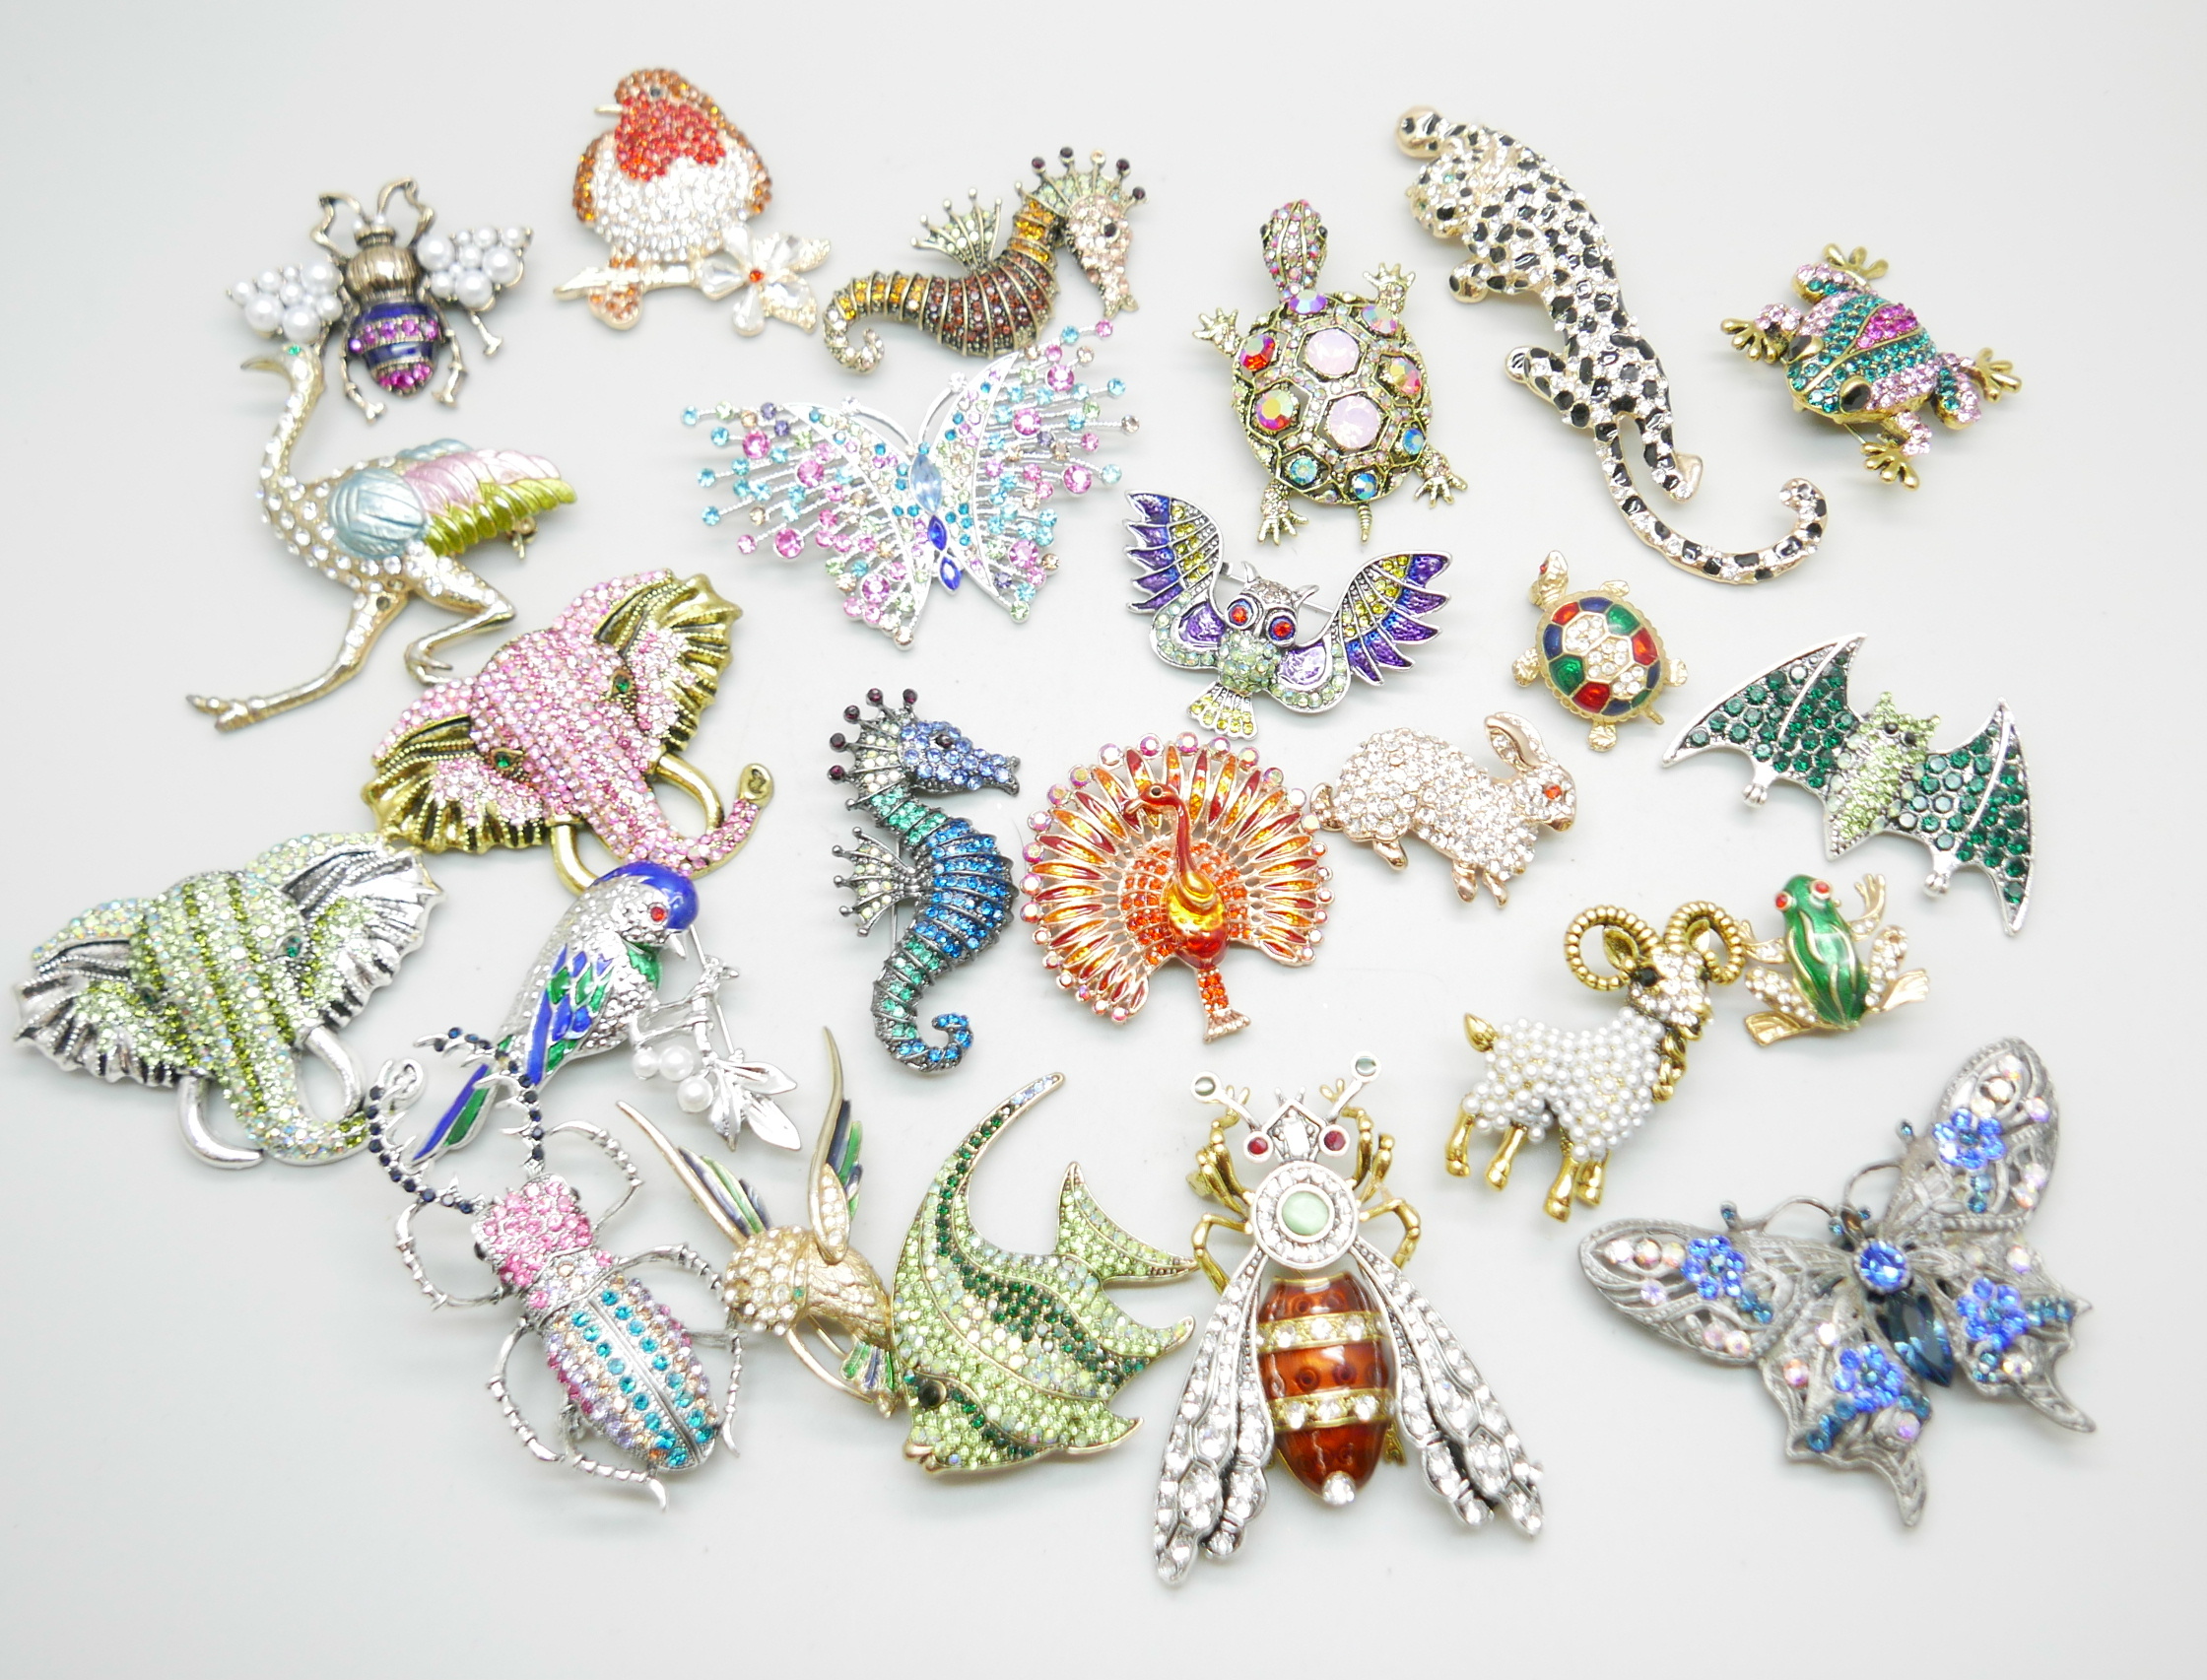 A collection of twenty-three rhinestones animal, bird, insect and other brooches, and one